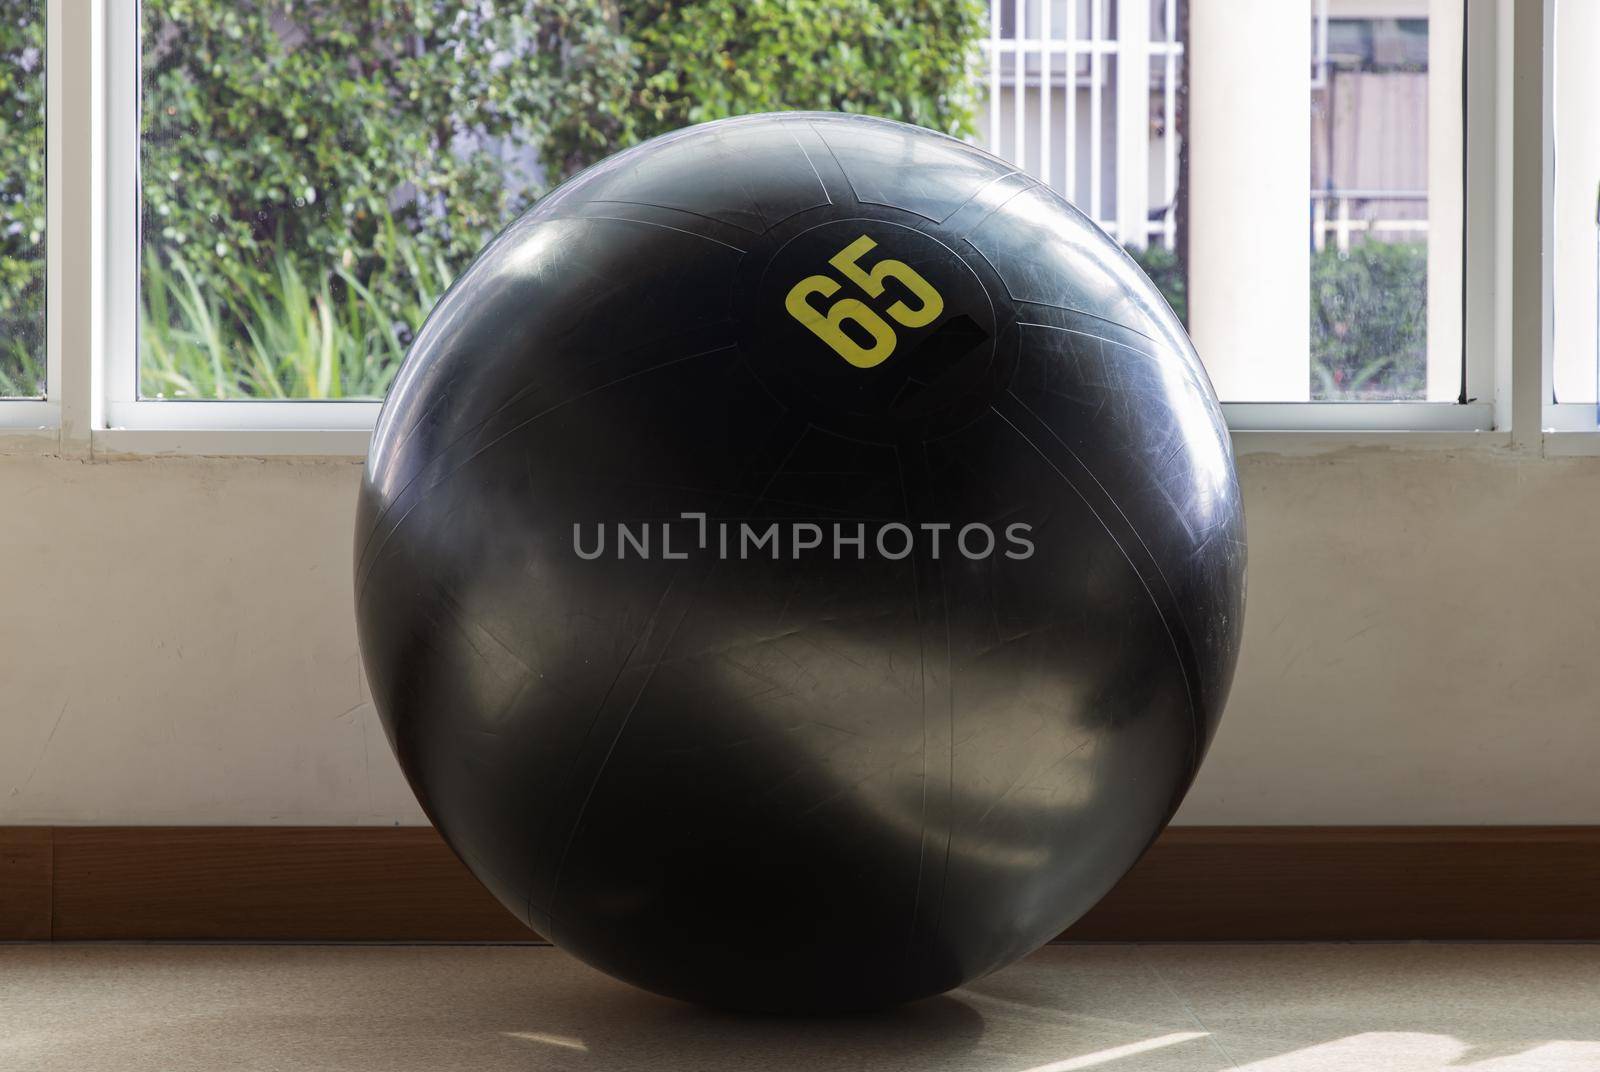 Black fitness exercise ball on the floor gym studio. Equipment for doing sport exercises with free space. Gym concept, Selective focus.